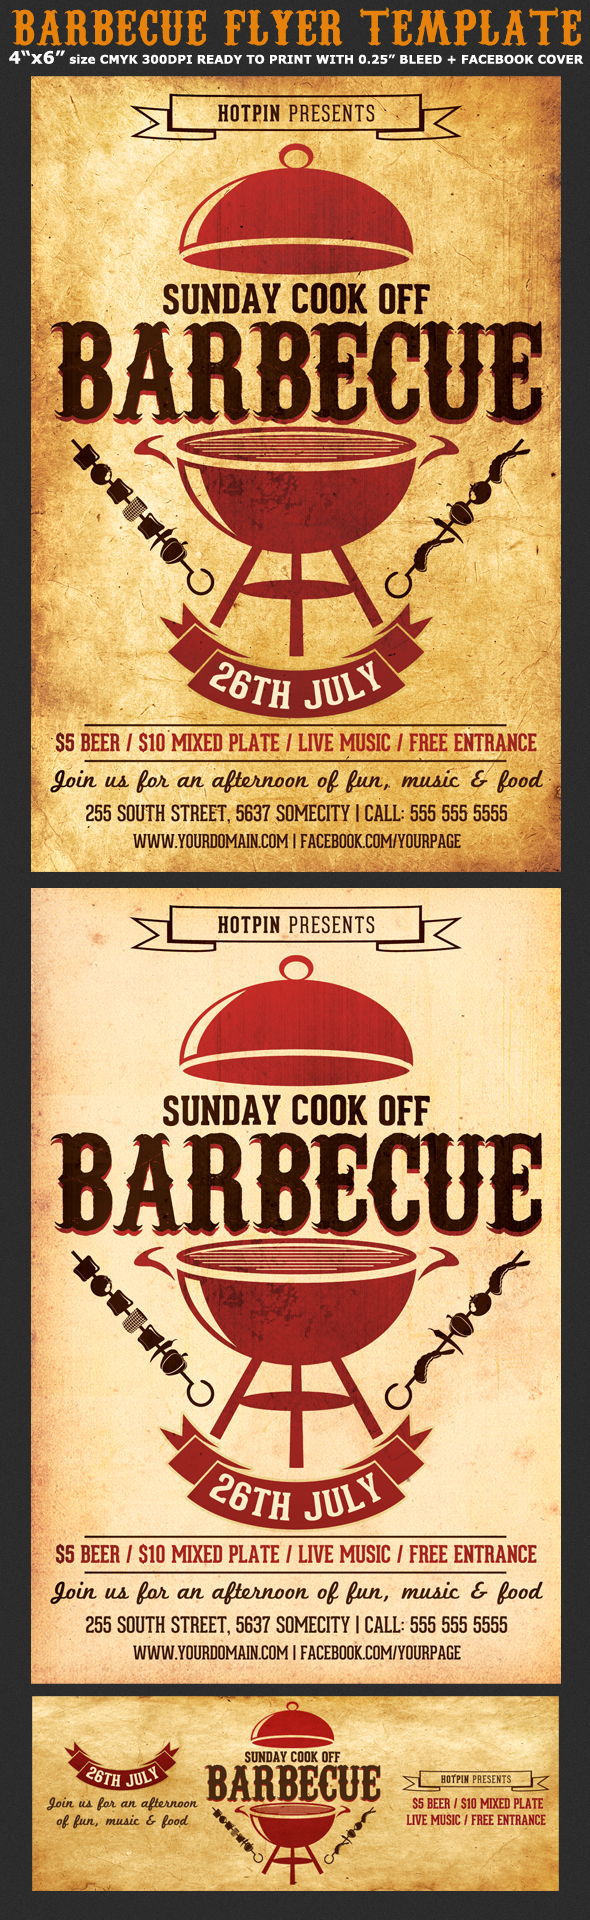 4th of July barbecue barbecue flyer BBQ bbq flyer BBQ restaurant beach party cookout Event Food  grill restaurant independence day pick nick